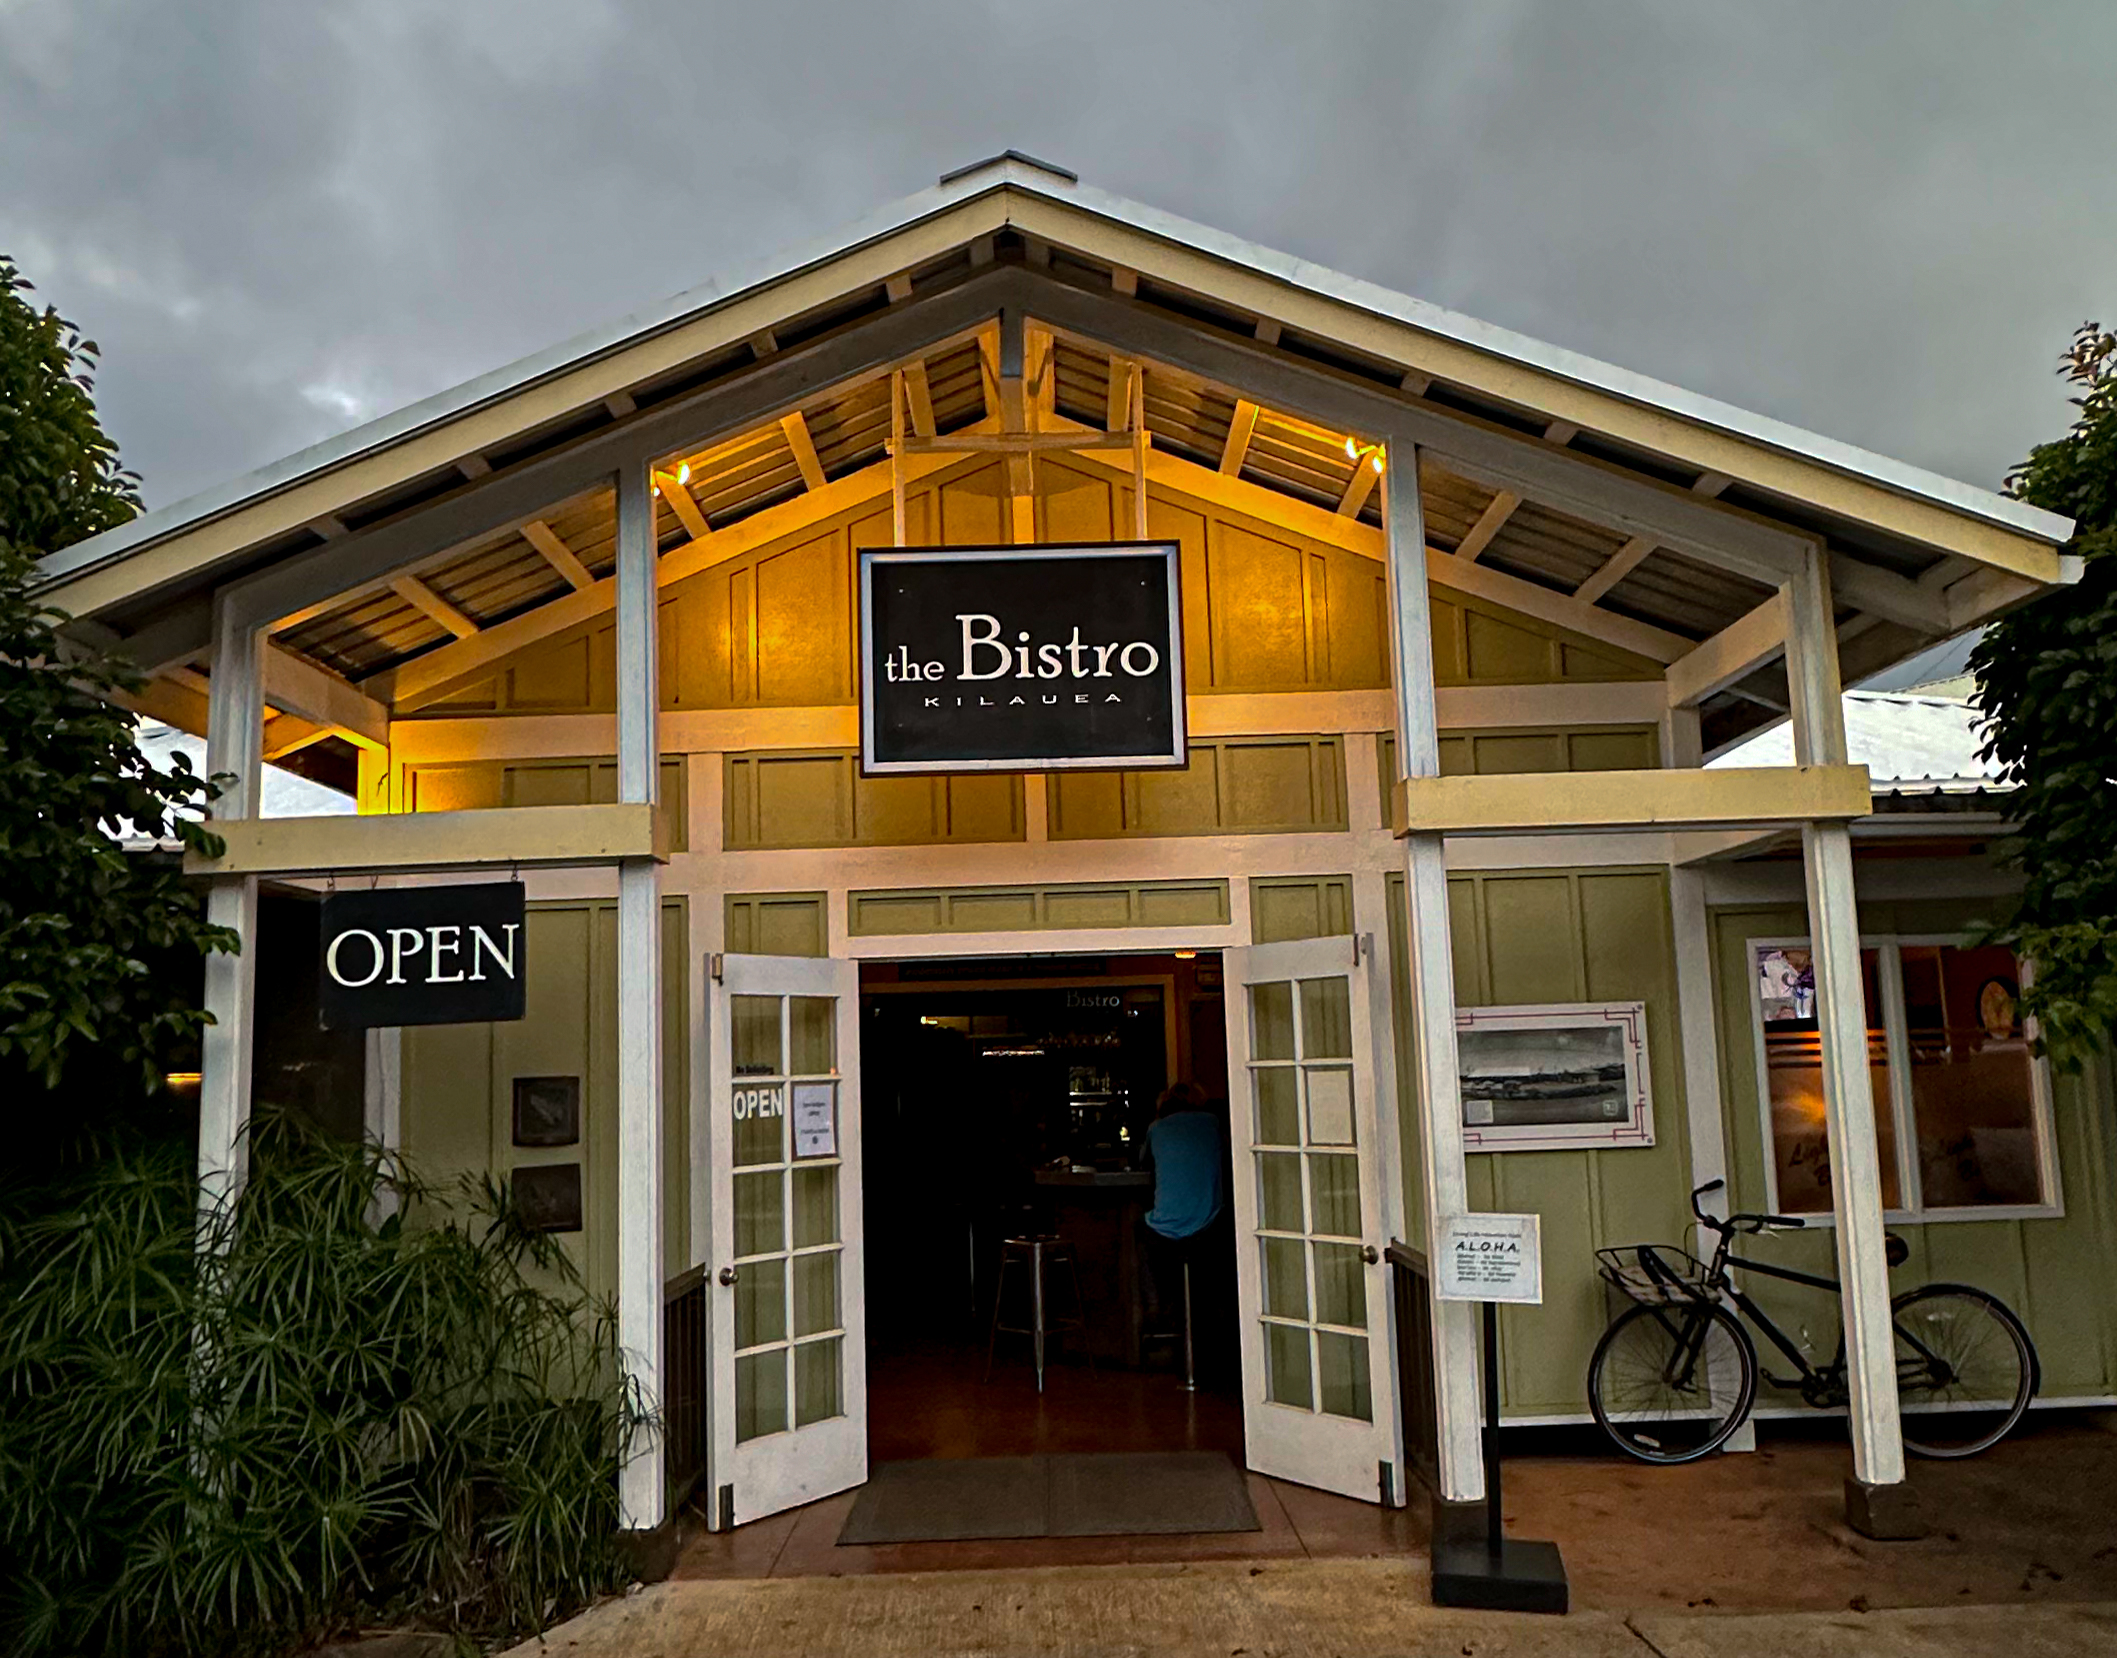 A Magnificent Meal at the Bistro in Kilauea on the Island of Kauai!